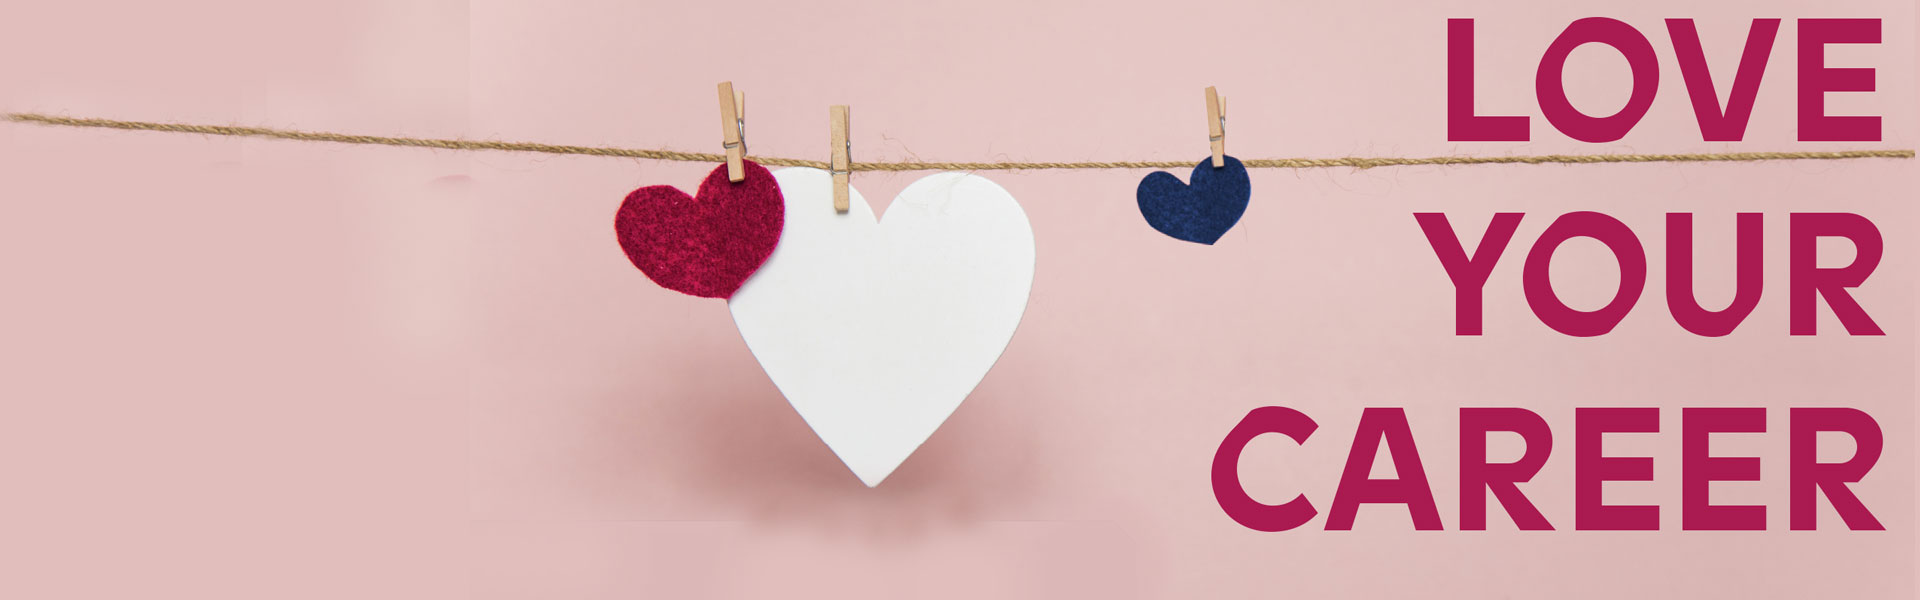 Graphic of hearts hanging on a washing line and the text 'Love Your Career' beside it